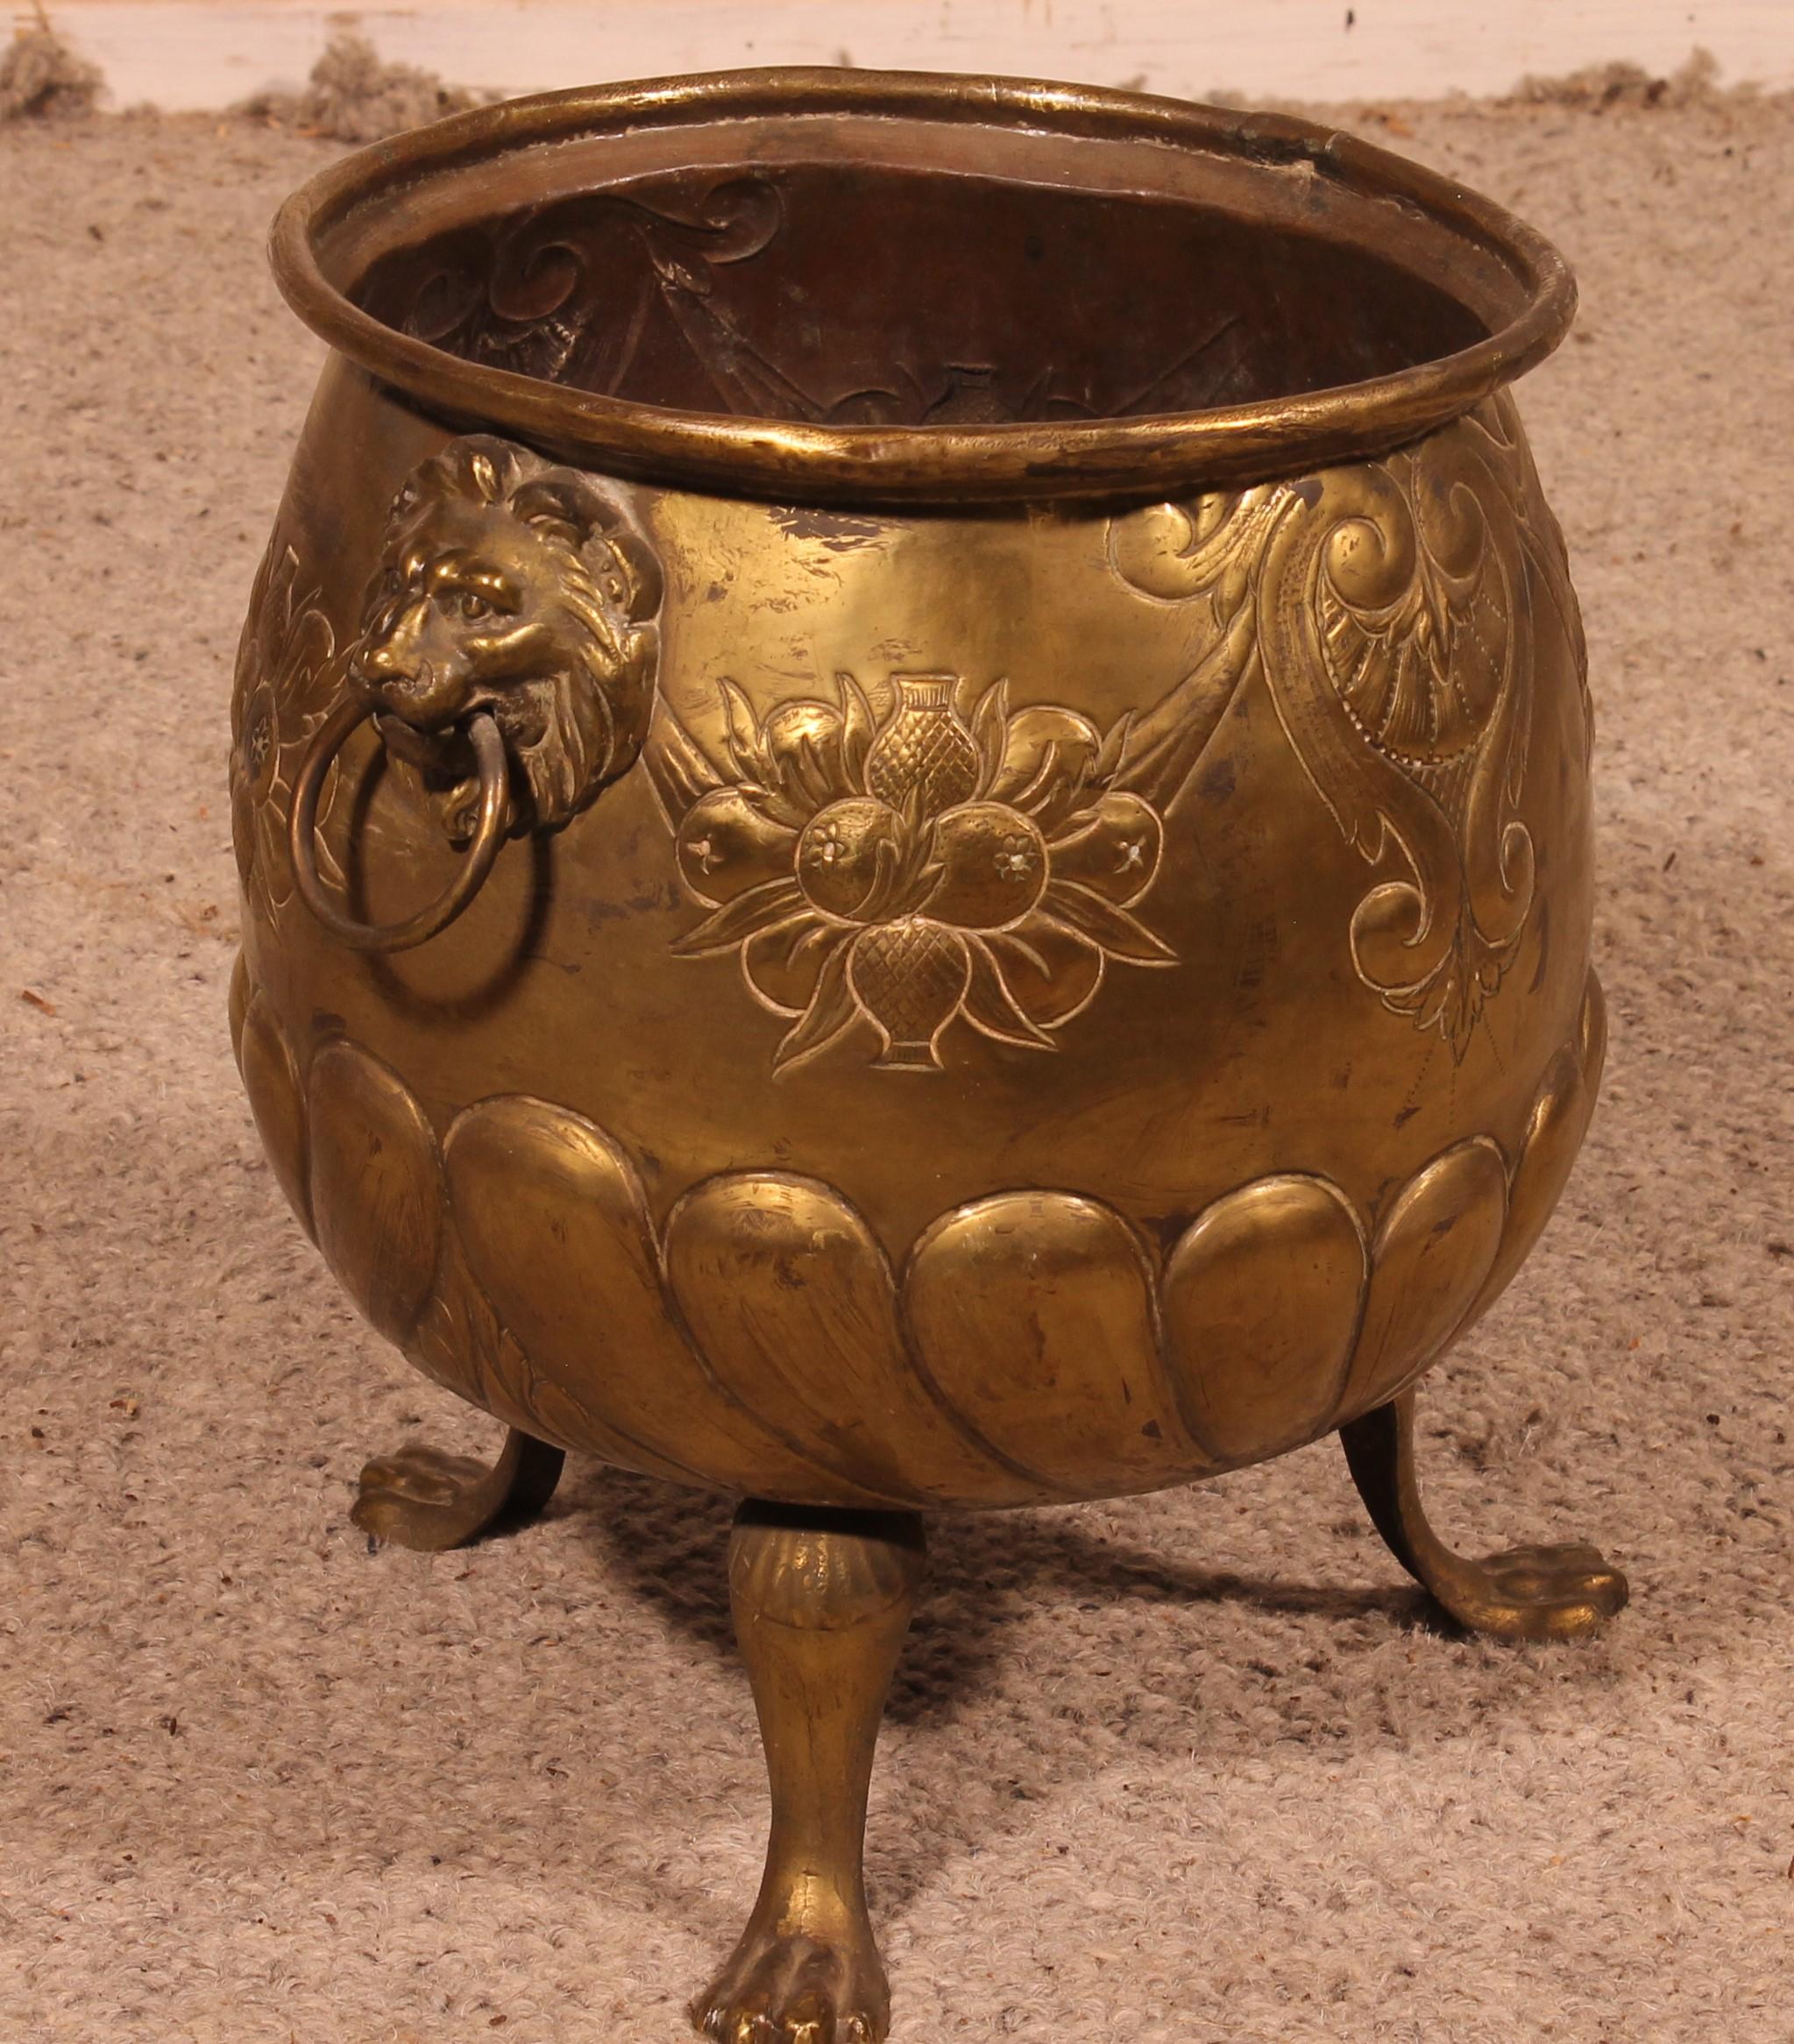 Elegant English coal bucket from the 19th century
Very beautiful coal bucket with two handles decorated with lion's heads and resting on a tripod foot with a lion's claws
Beautiful original patina and very fine work
Perfect to put next to a fire to